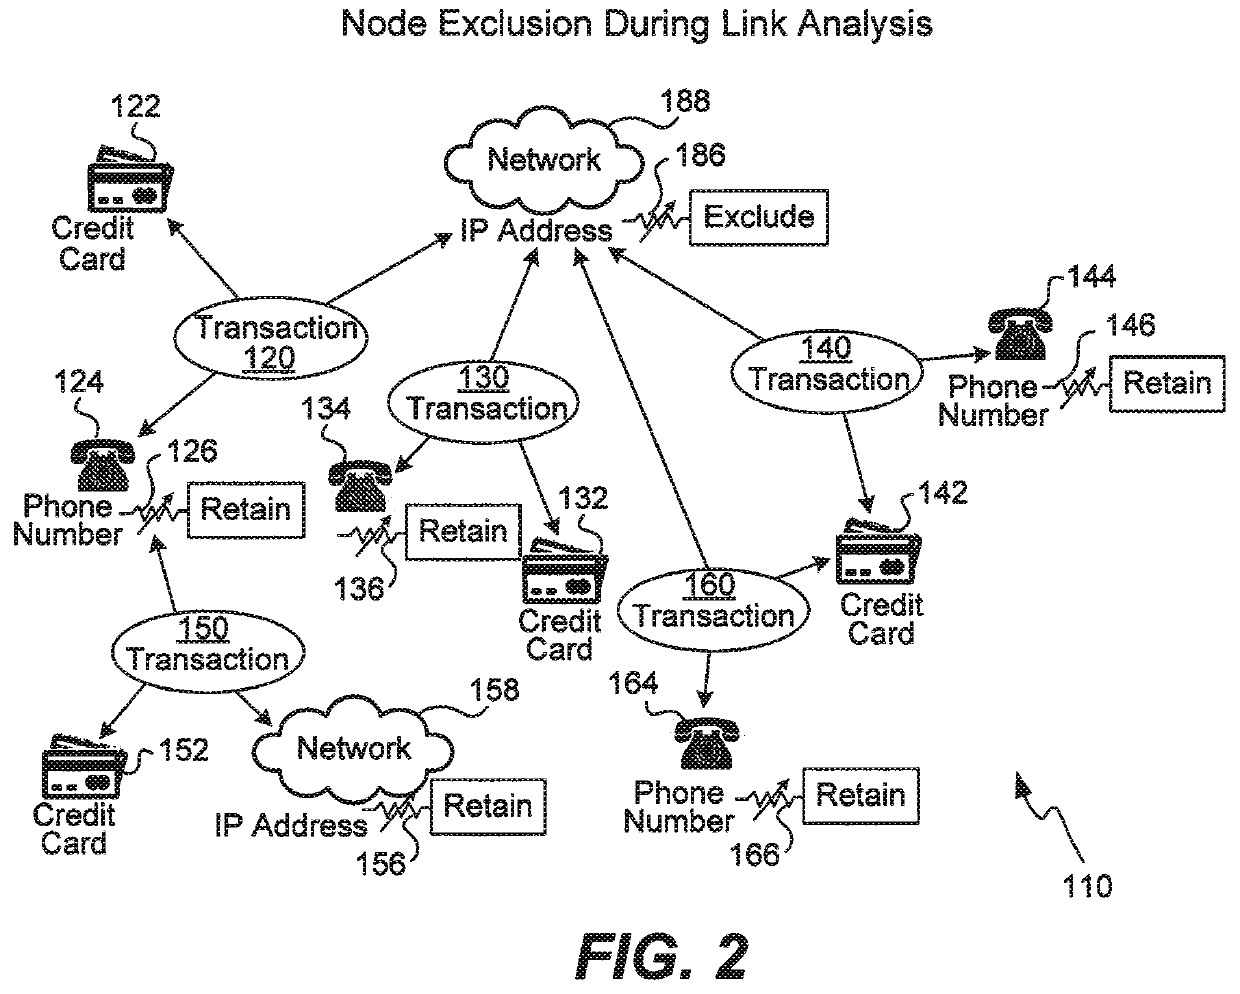 Exclusion of nodes from link analysis